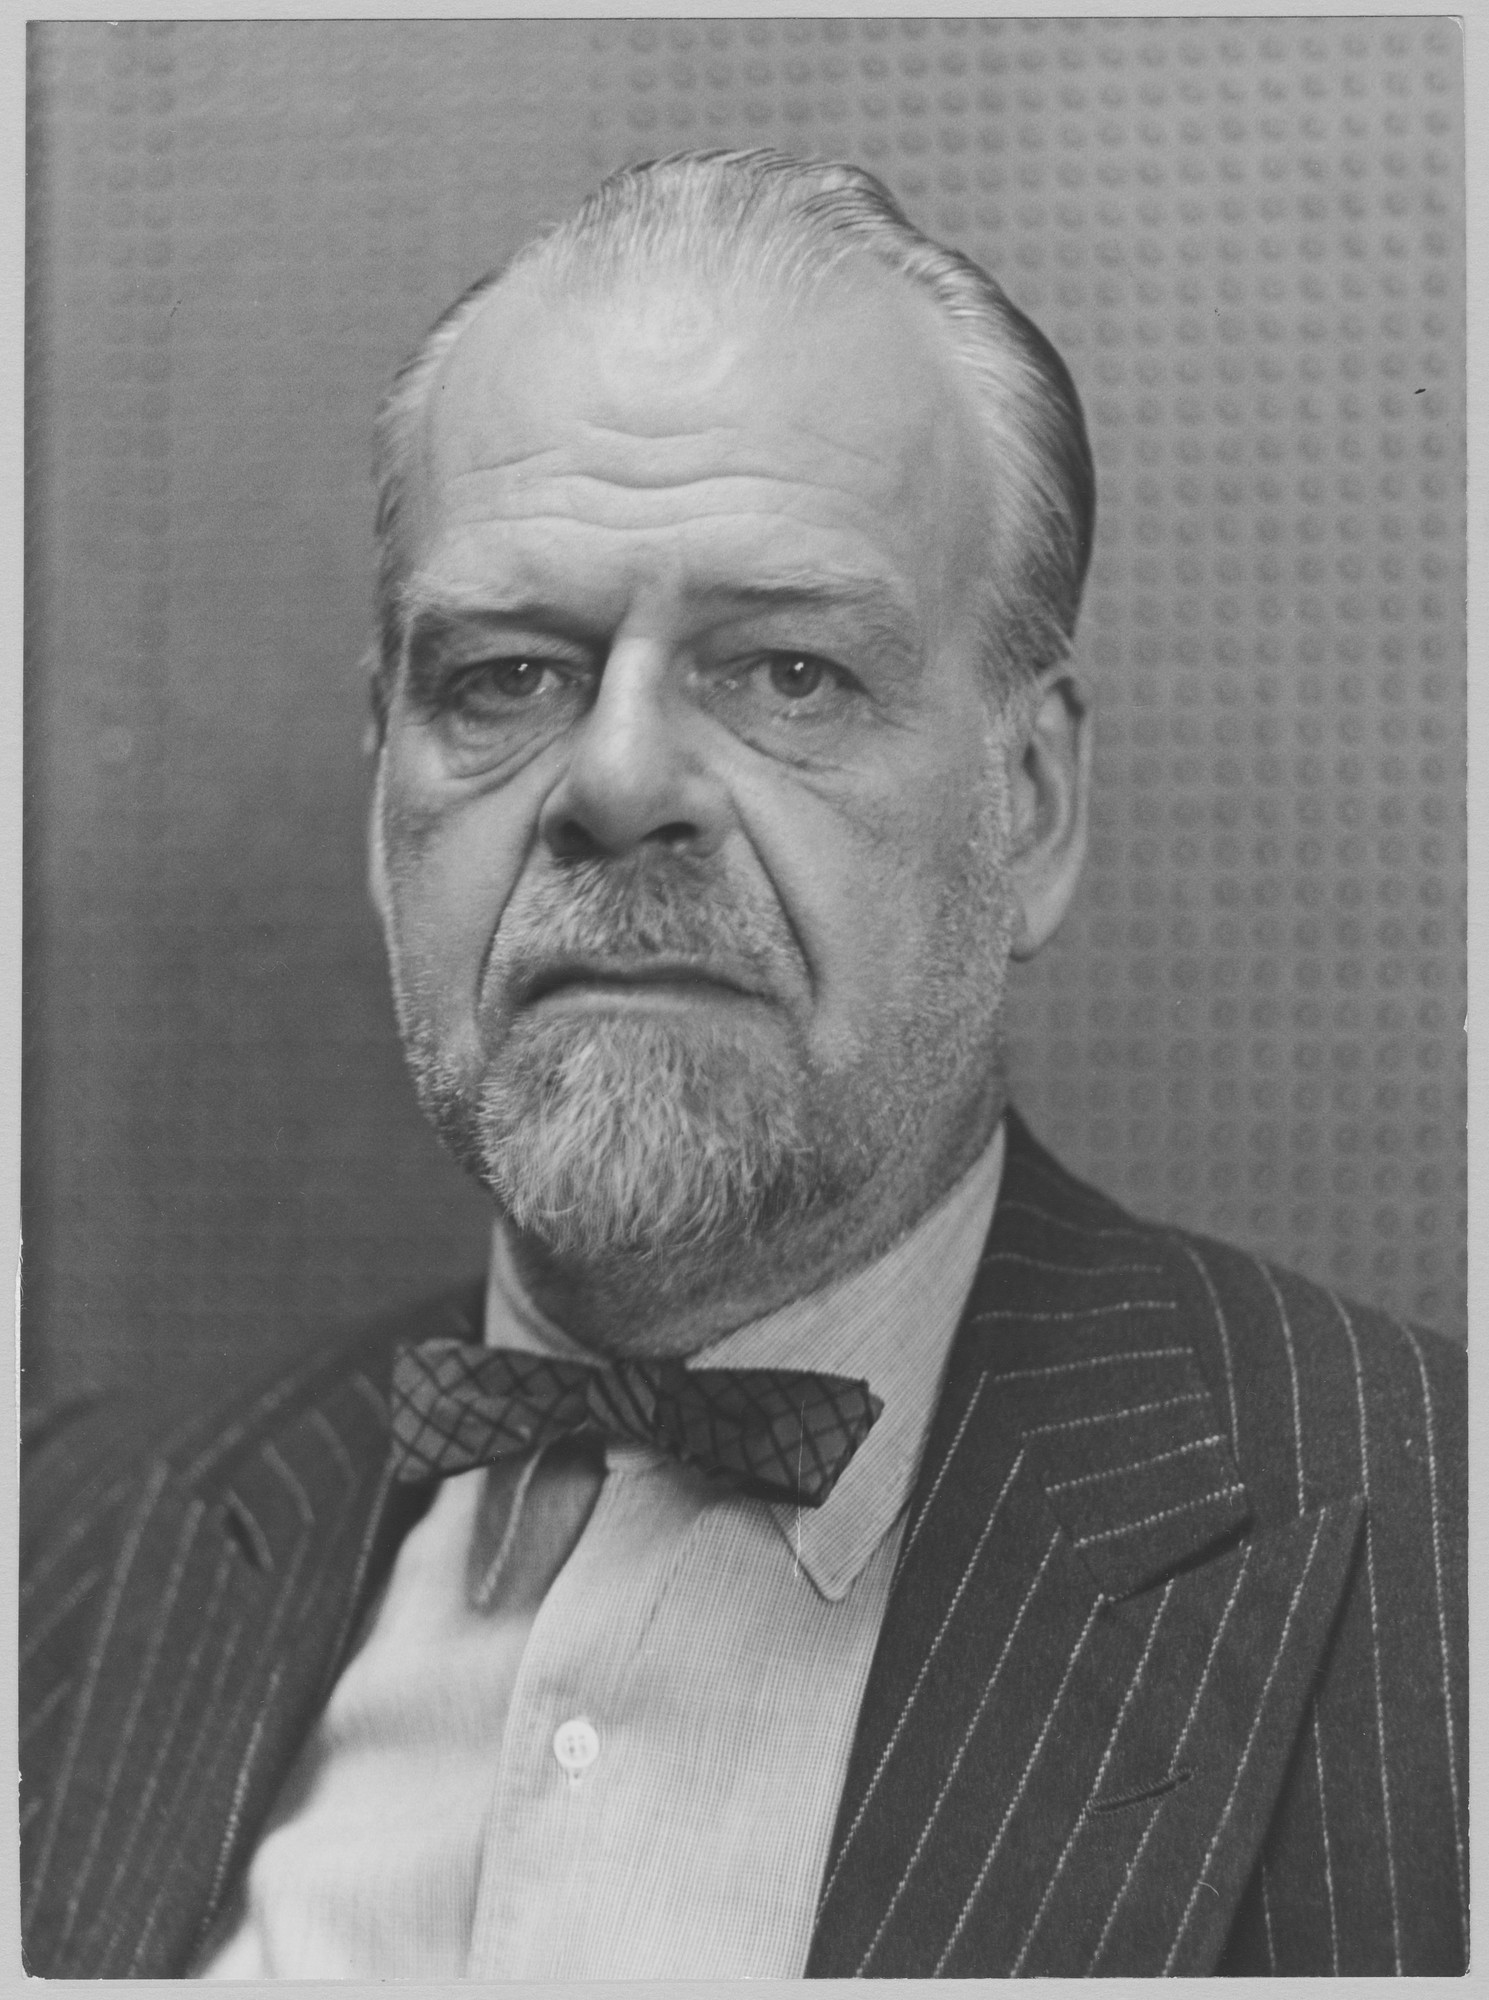 Publicity Photograph Of Henry Russell Hitchcock Released In Connection With The Exhibition Latin American Architecture Since 1945 Moma Exh 590 November 23 1955 February 19 1956 Moma